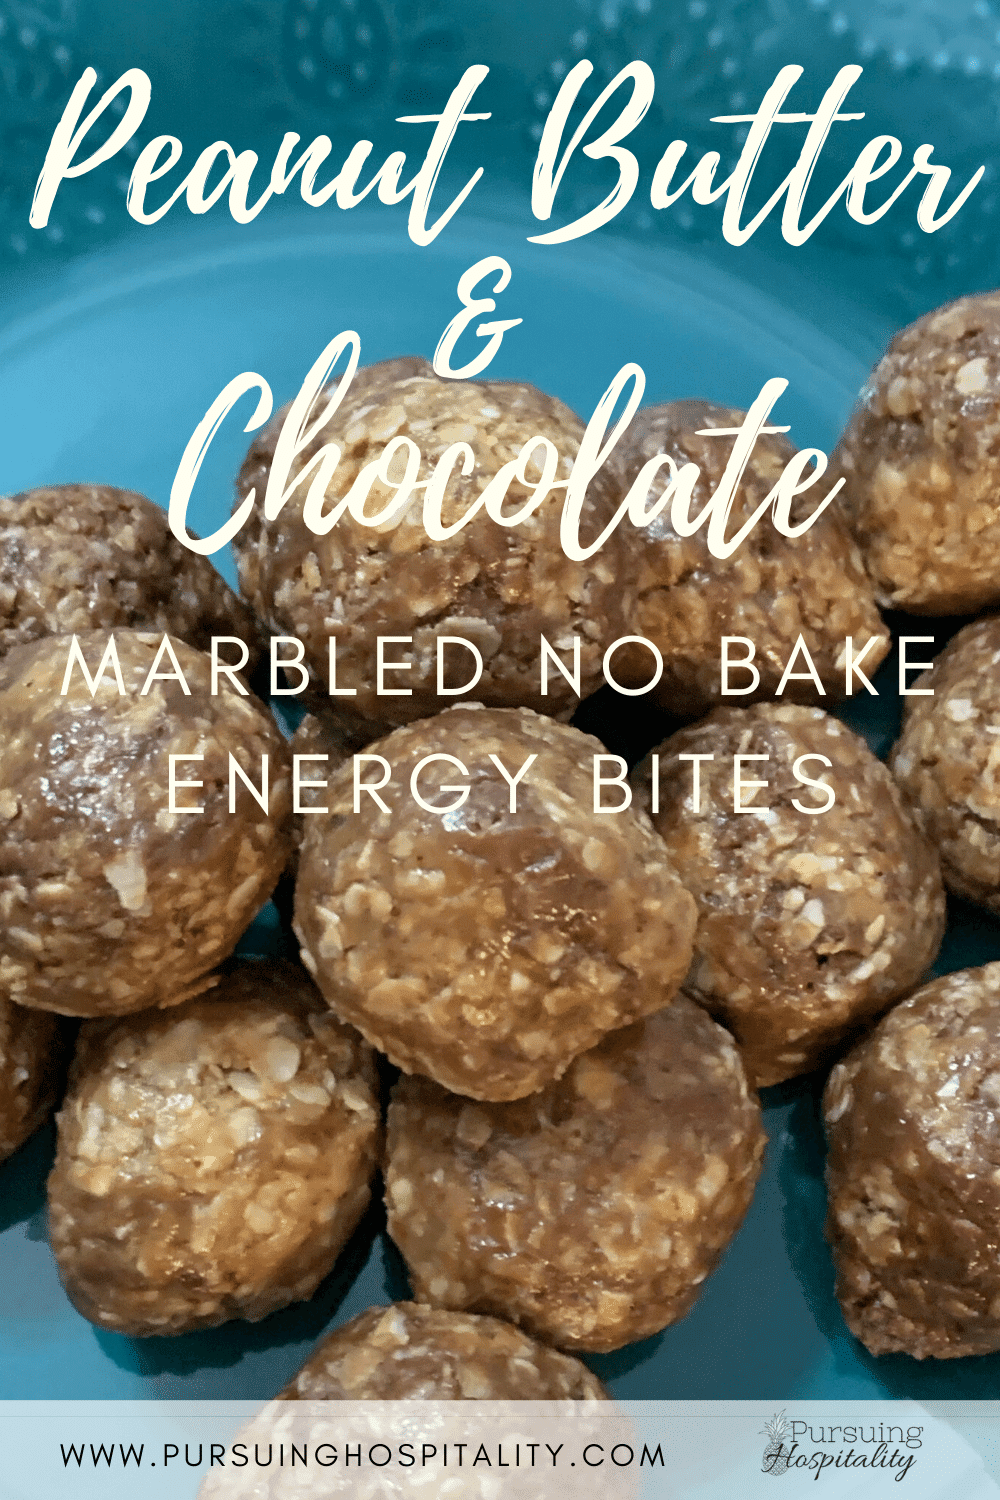 Peanut Butter & Chocolate Marbled No Bake Energy Bites